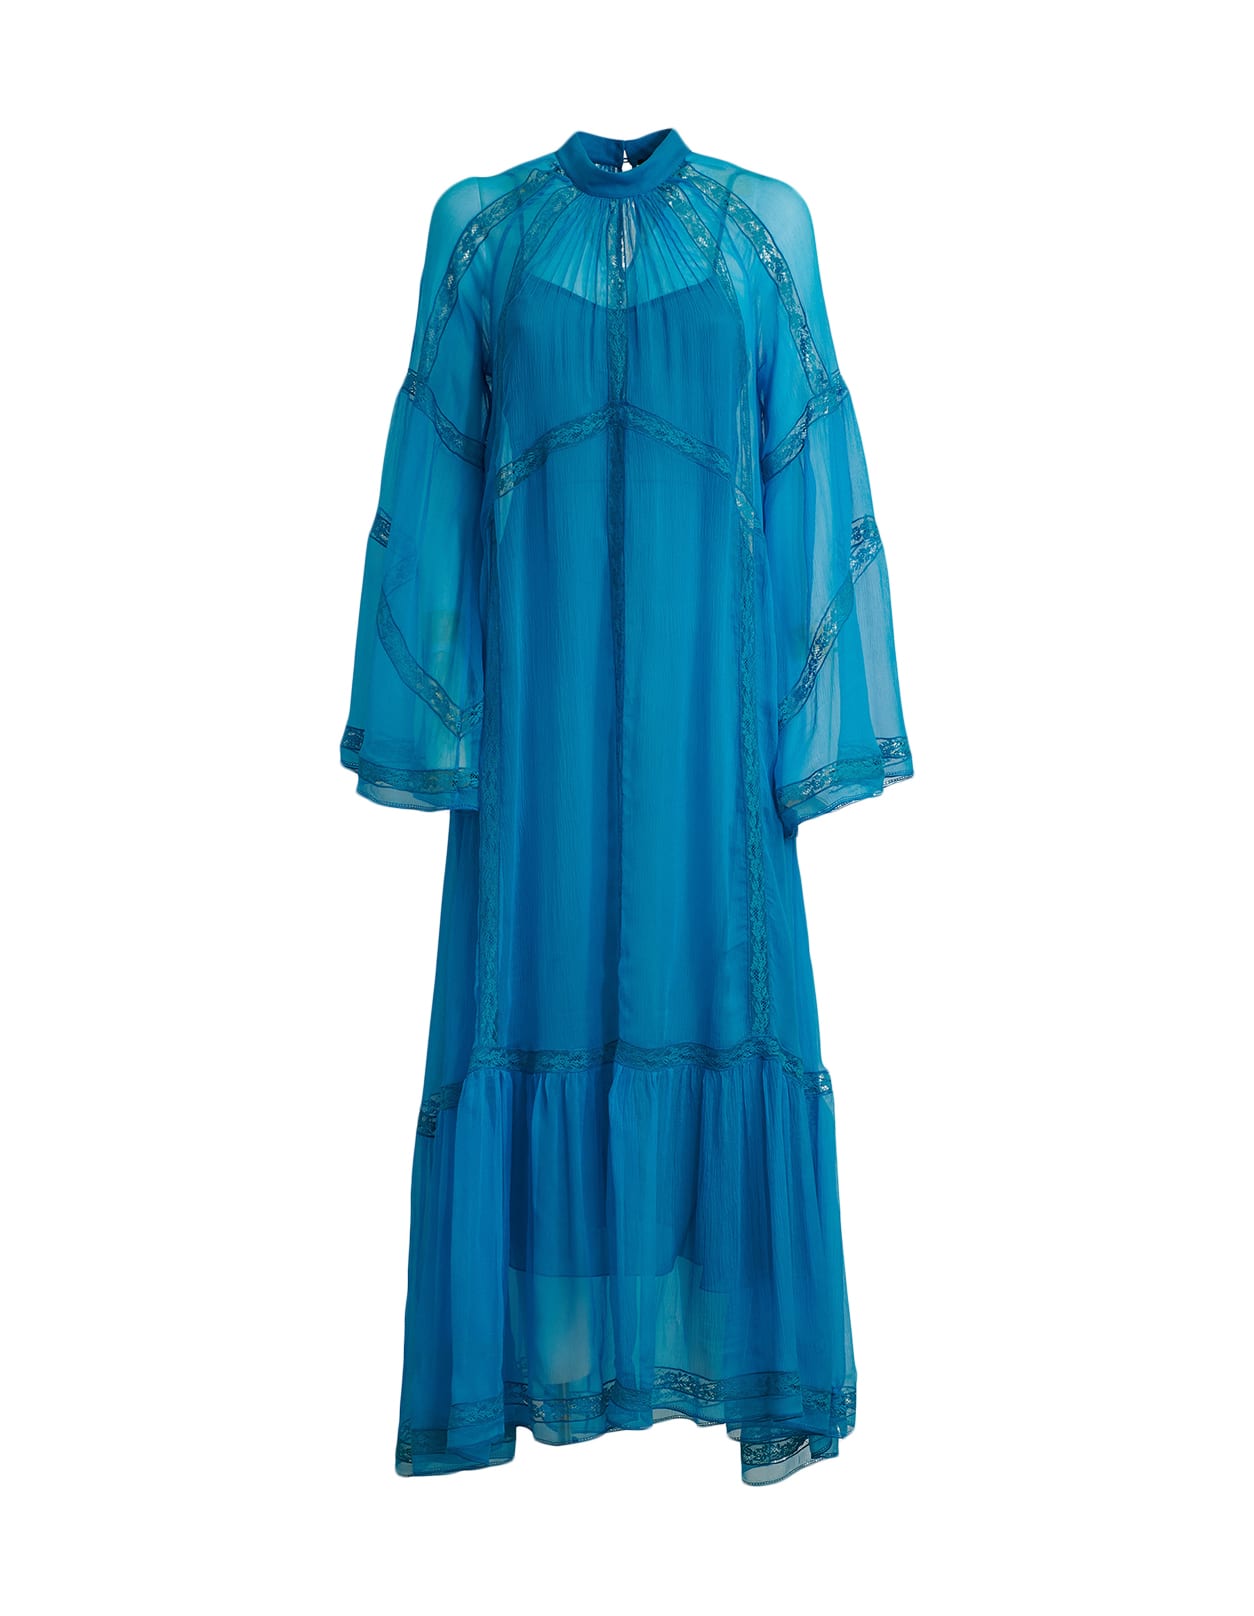 Etro Long Light Blue Tunic Dress With Lace Inserts